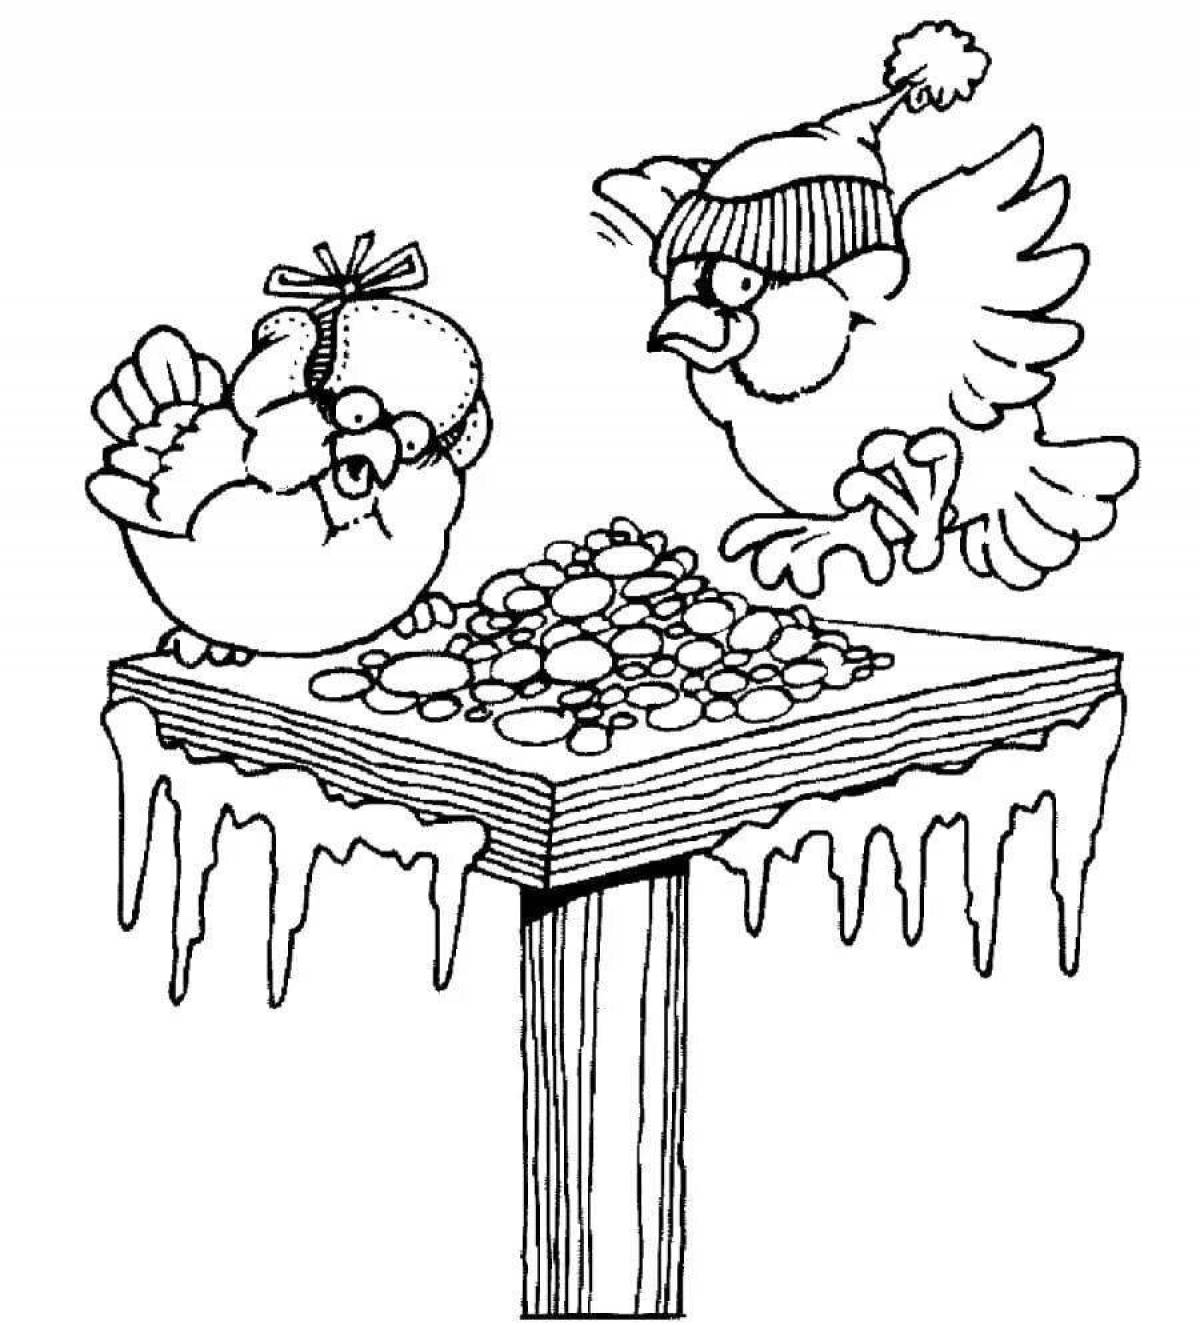 Fabulous bird feeder coloring pages for kids